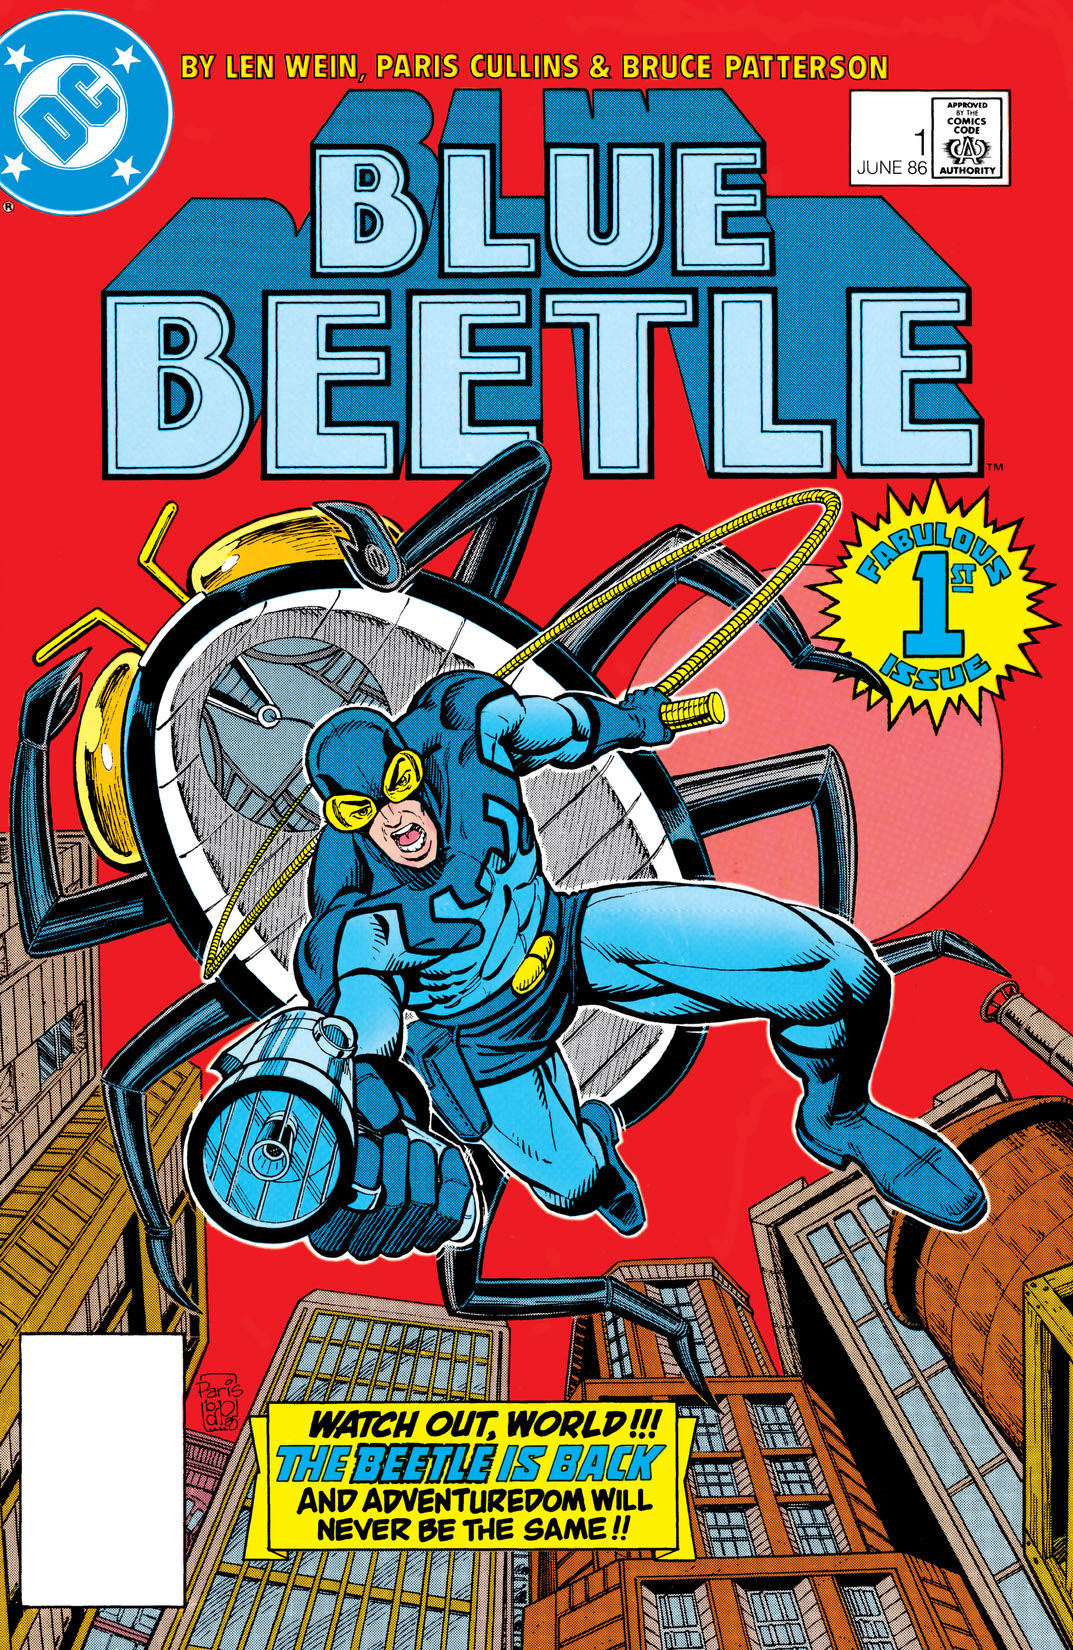 Blue Beetle (1986-) #1 preview images